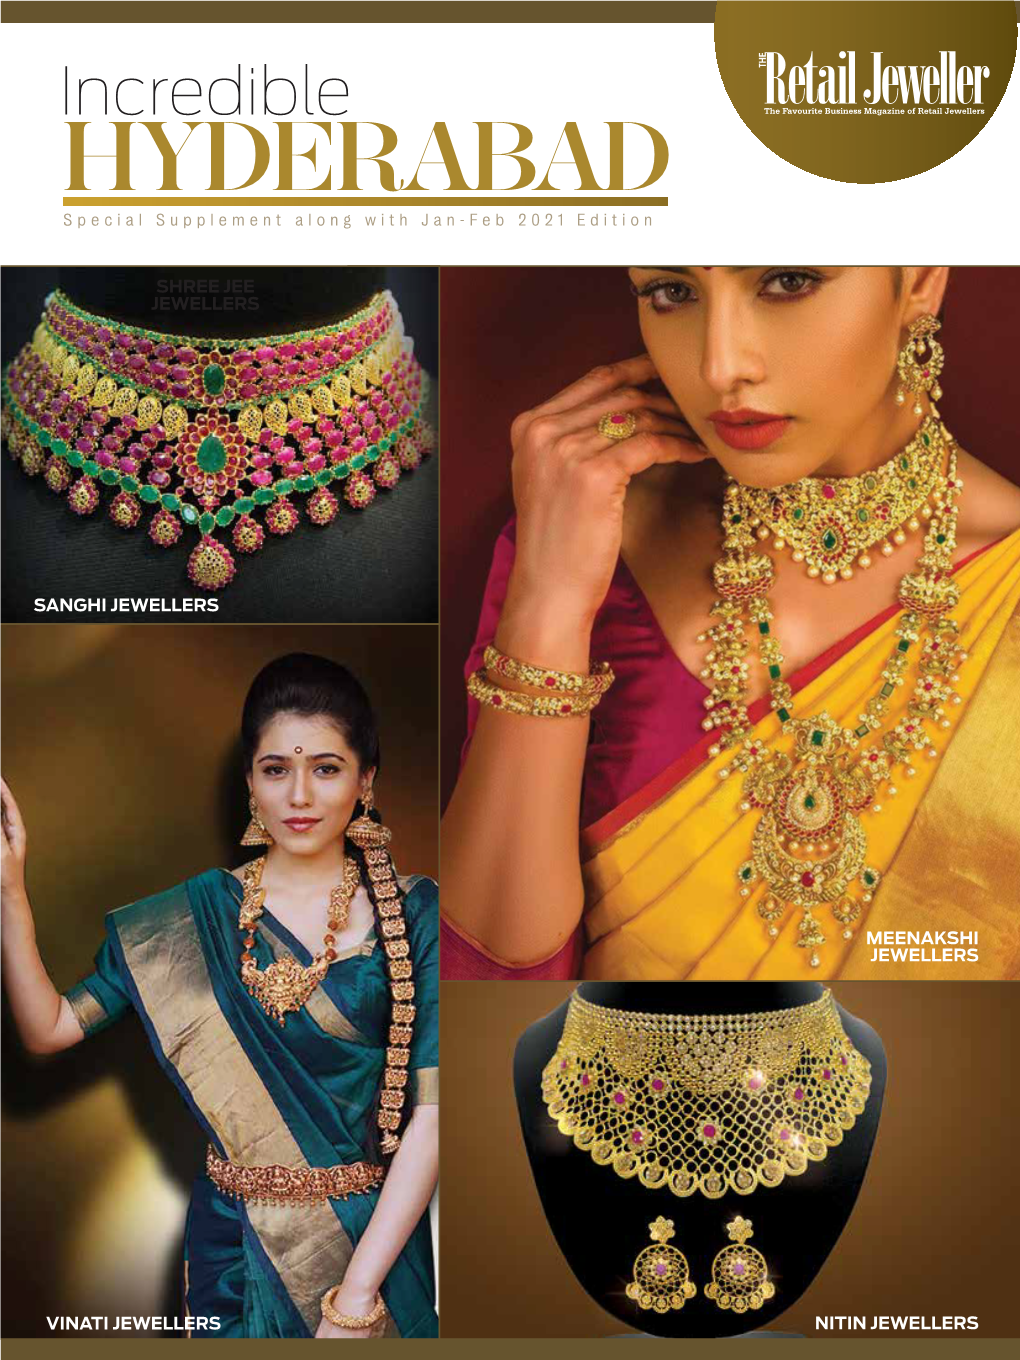 HYDERABAD Special Supplement Along with Jan-Feb 2021 Edition